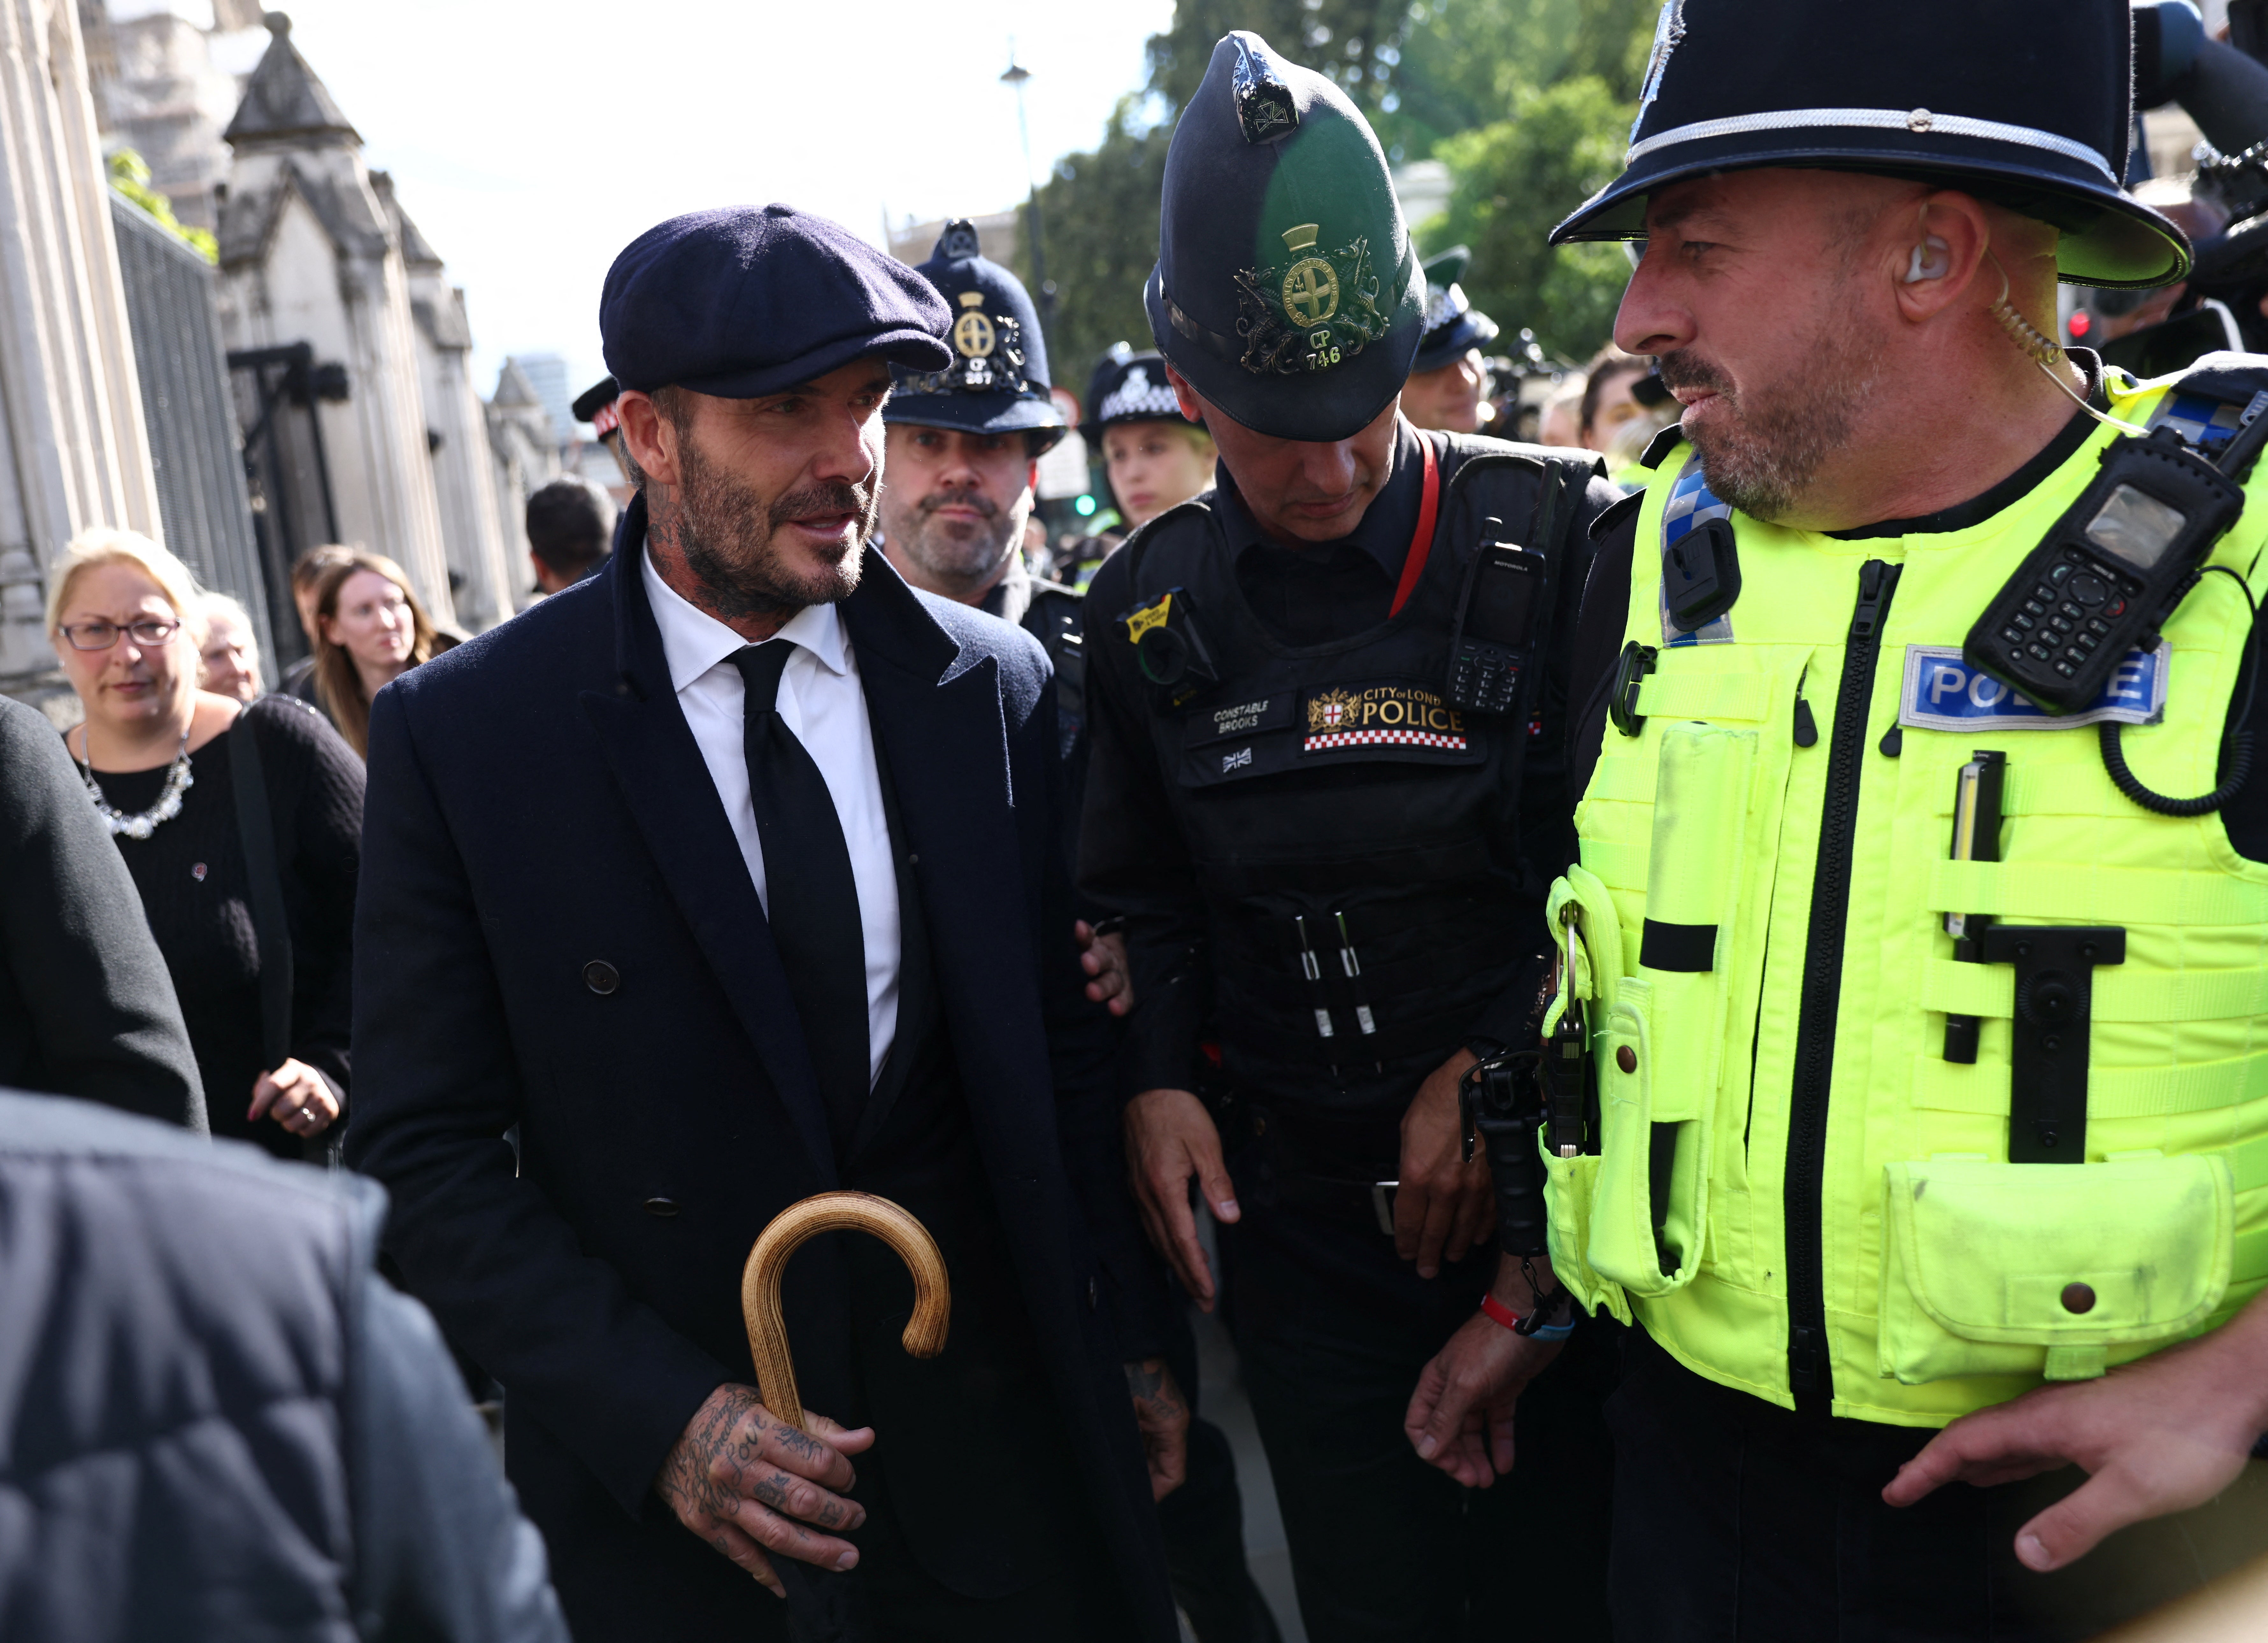 David Beckham after paying his respects to the Queen’s coffin on Friday